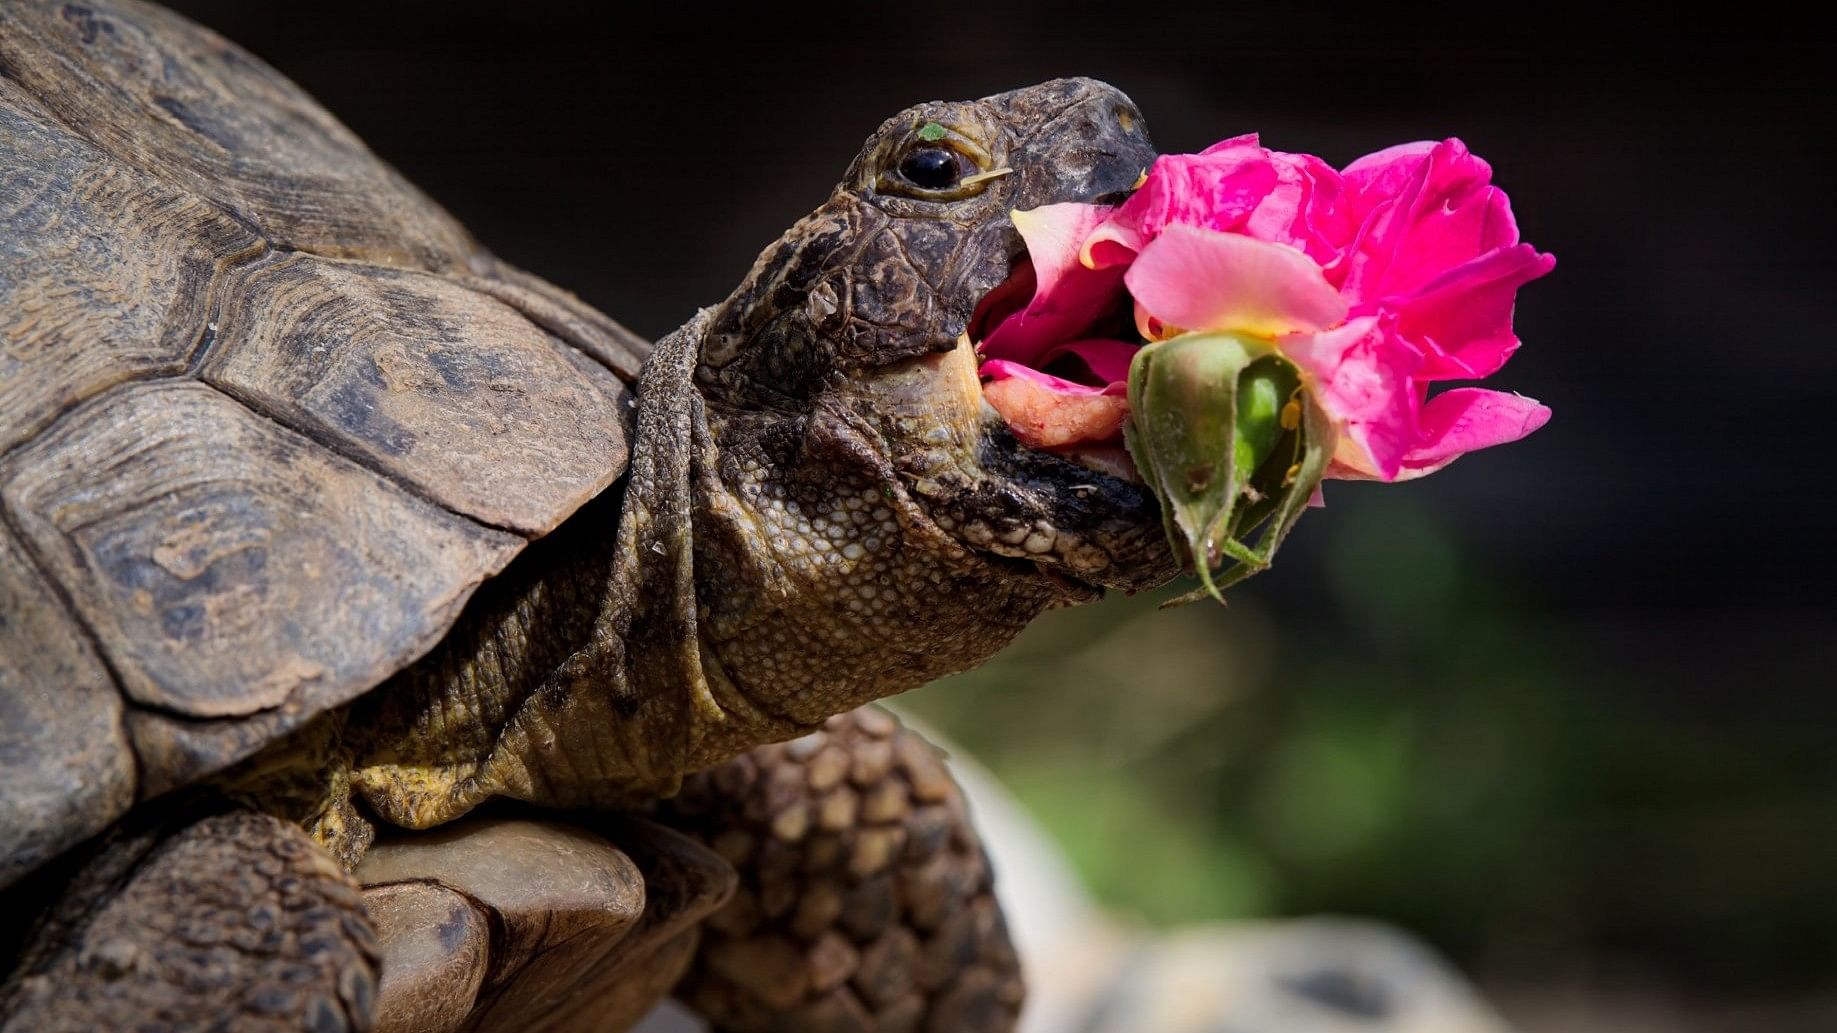 This turtle looked delighted with his snack in a photo captioned "New Rose" by Jonathan Casey.